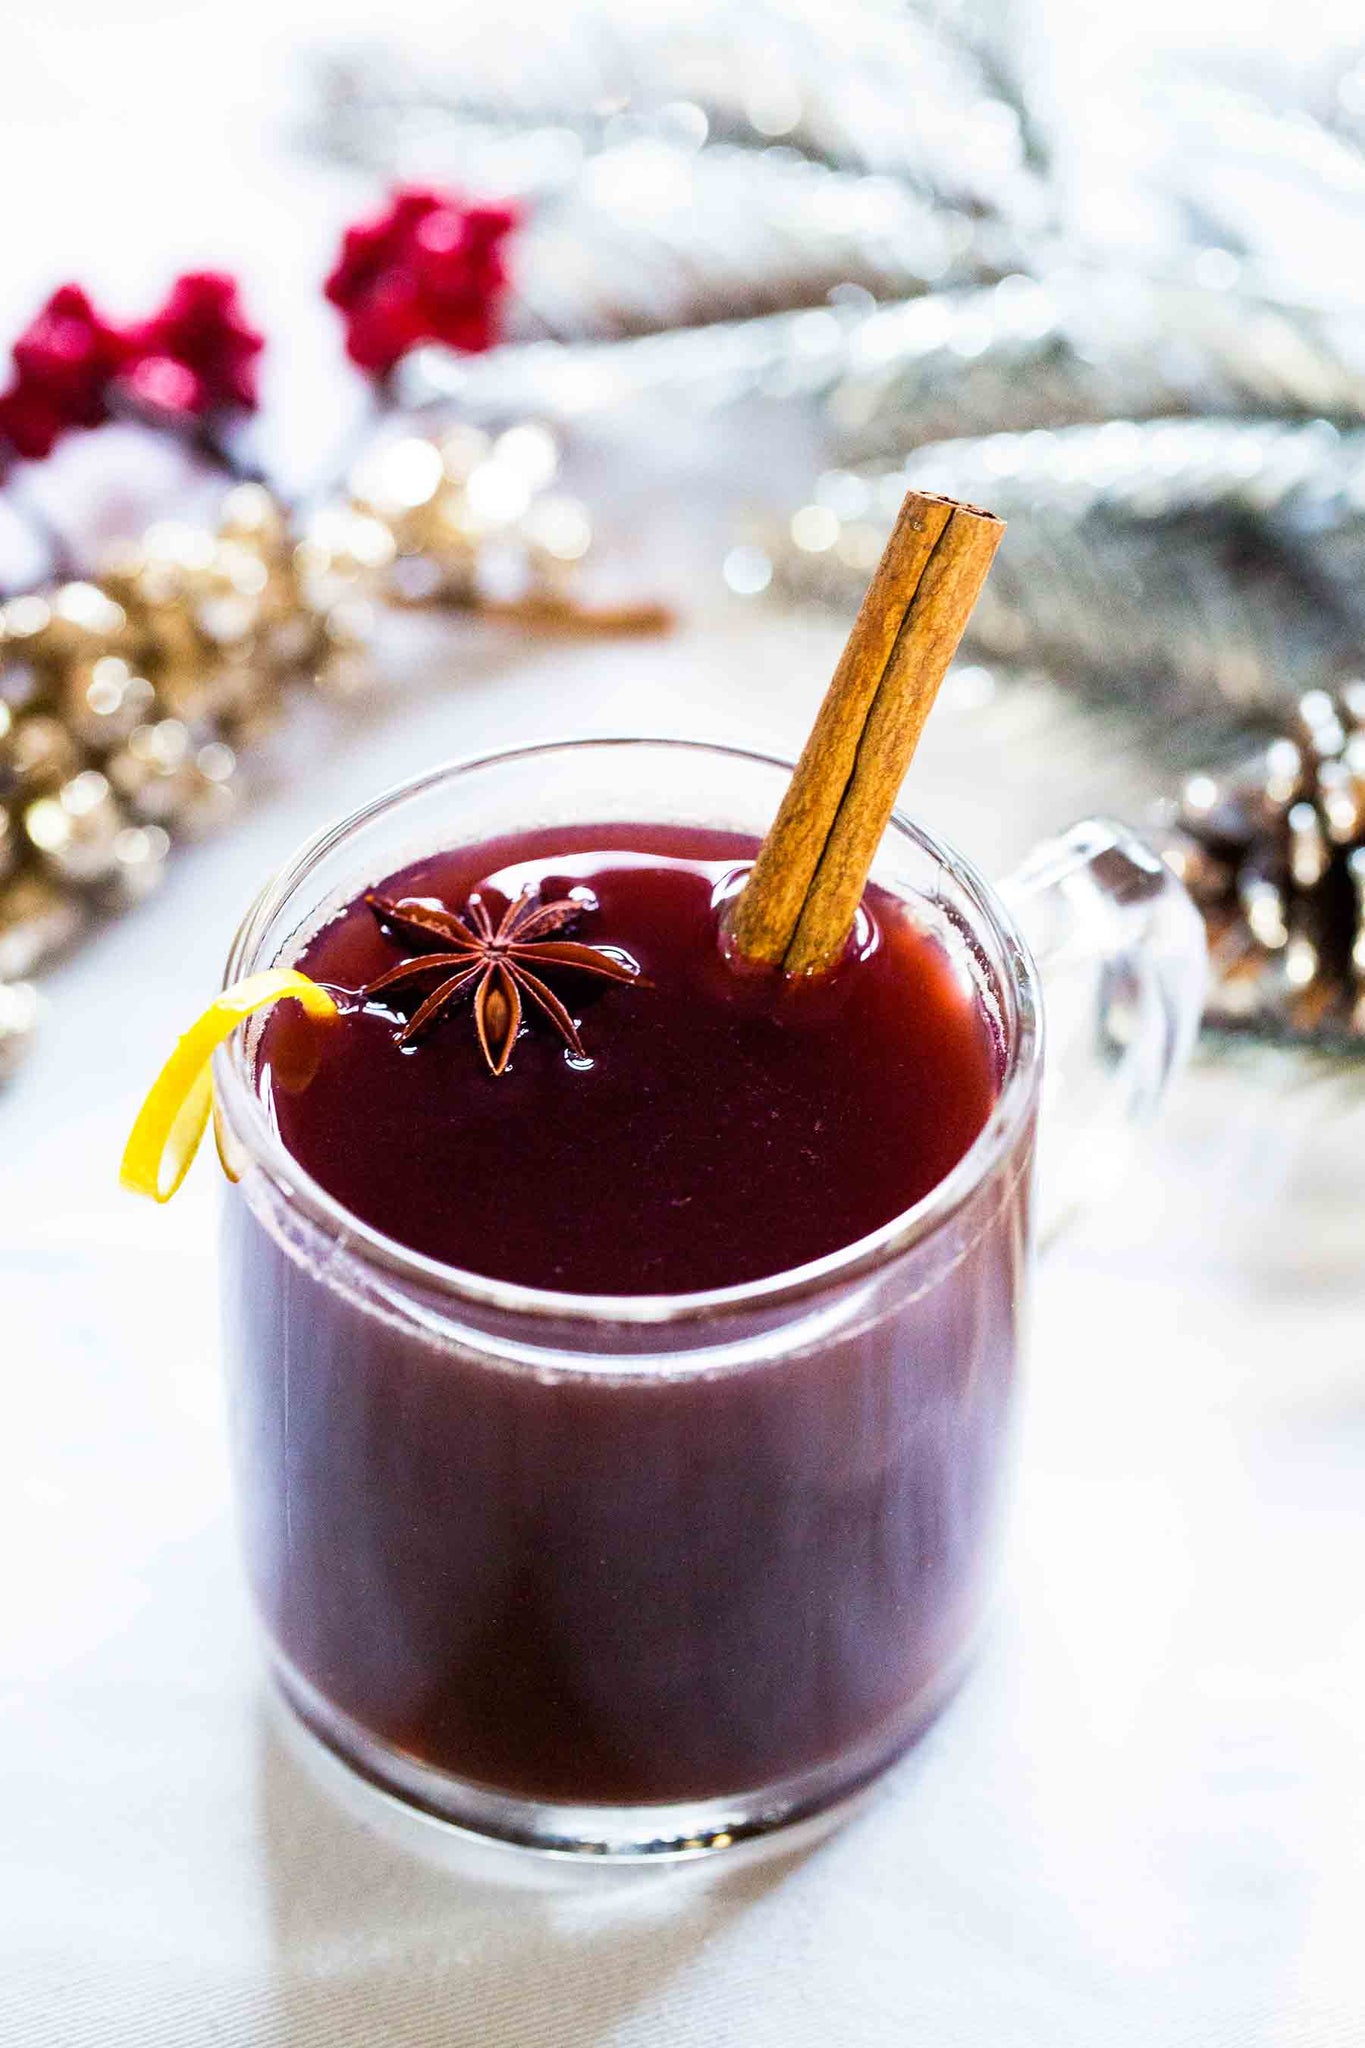 Honey mulled wine with anise star